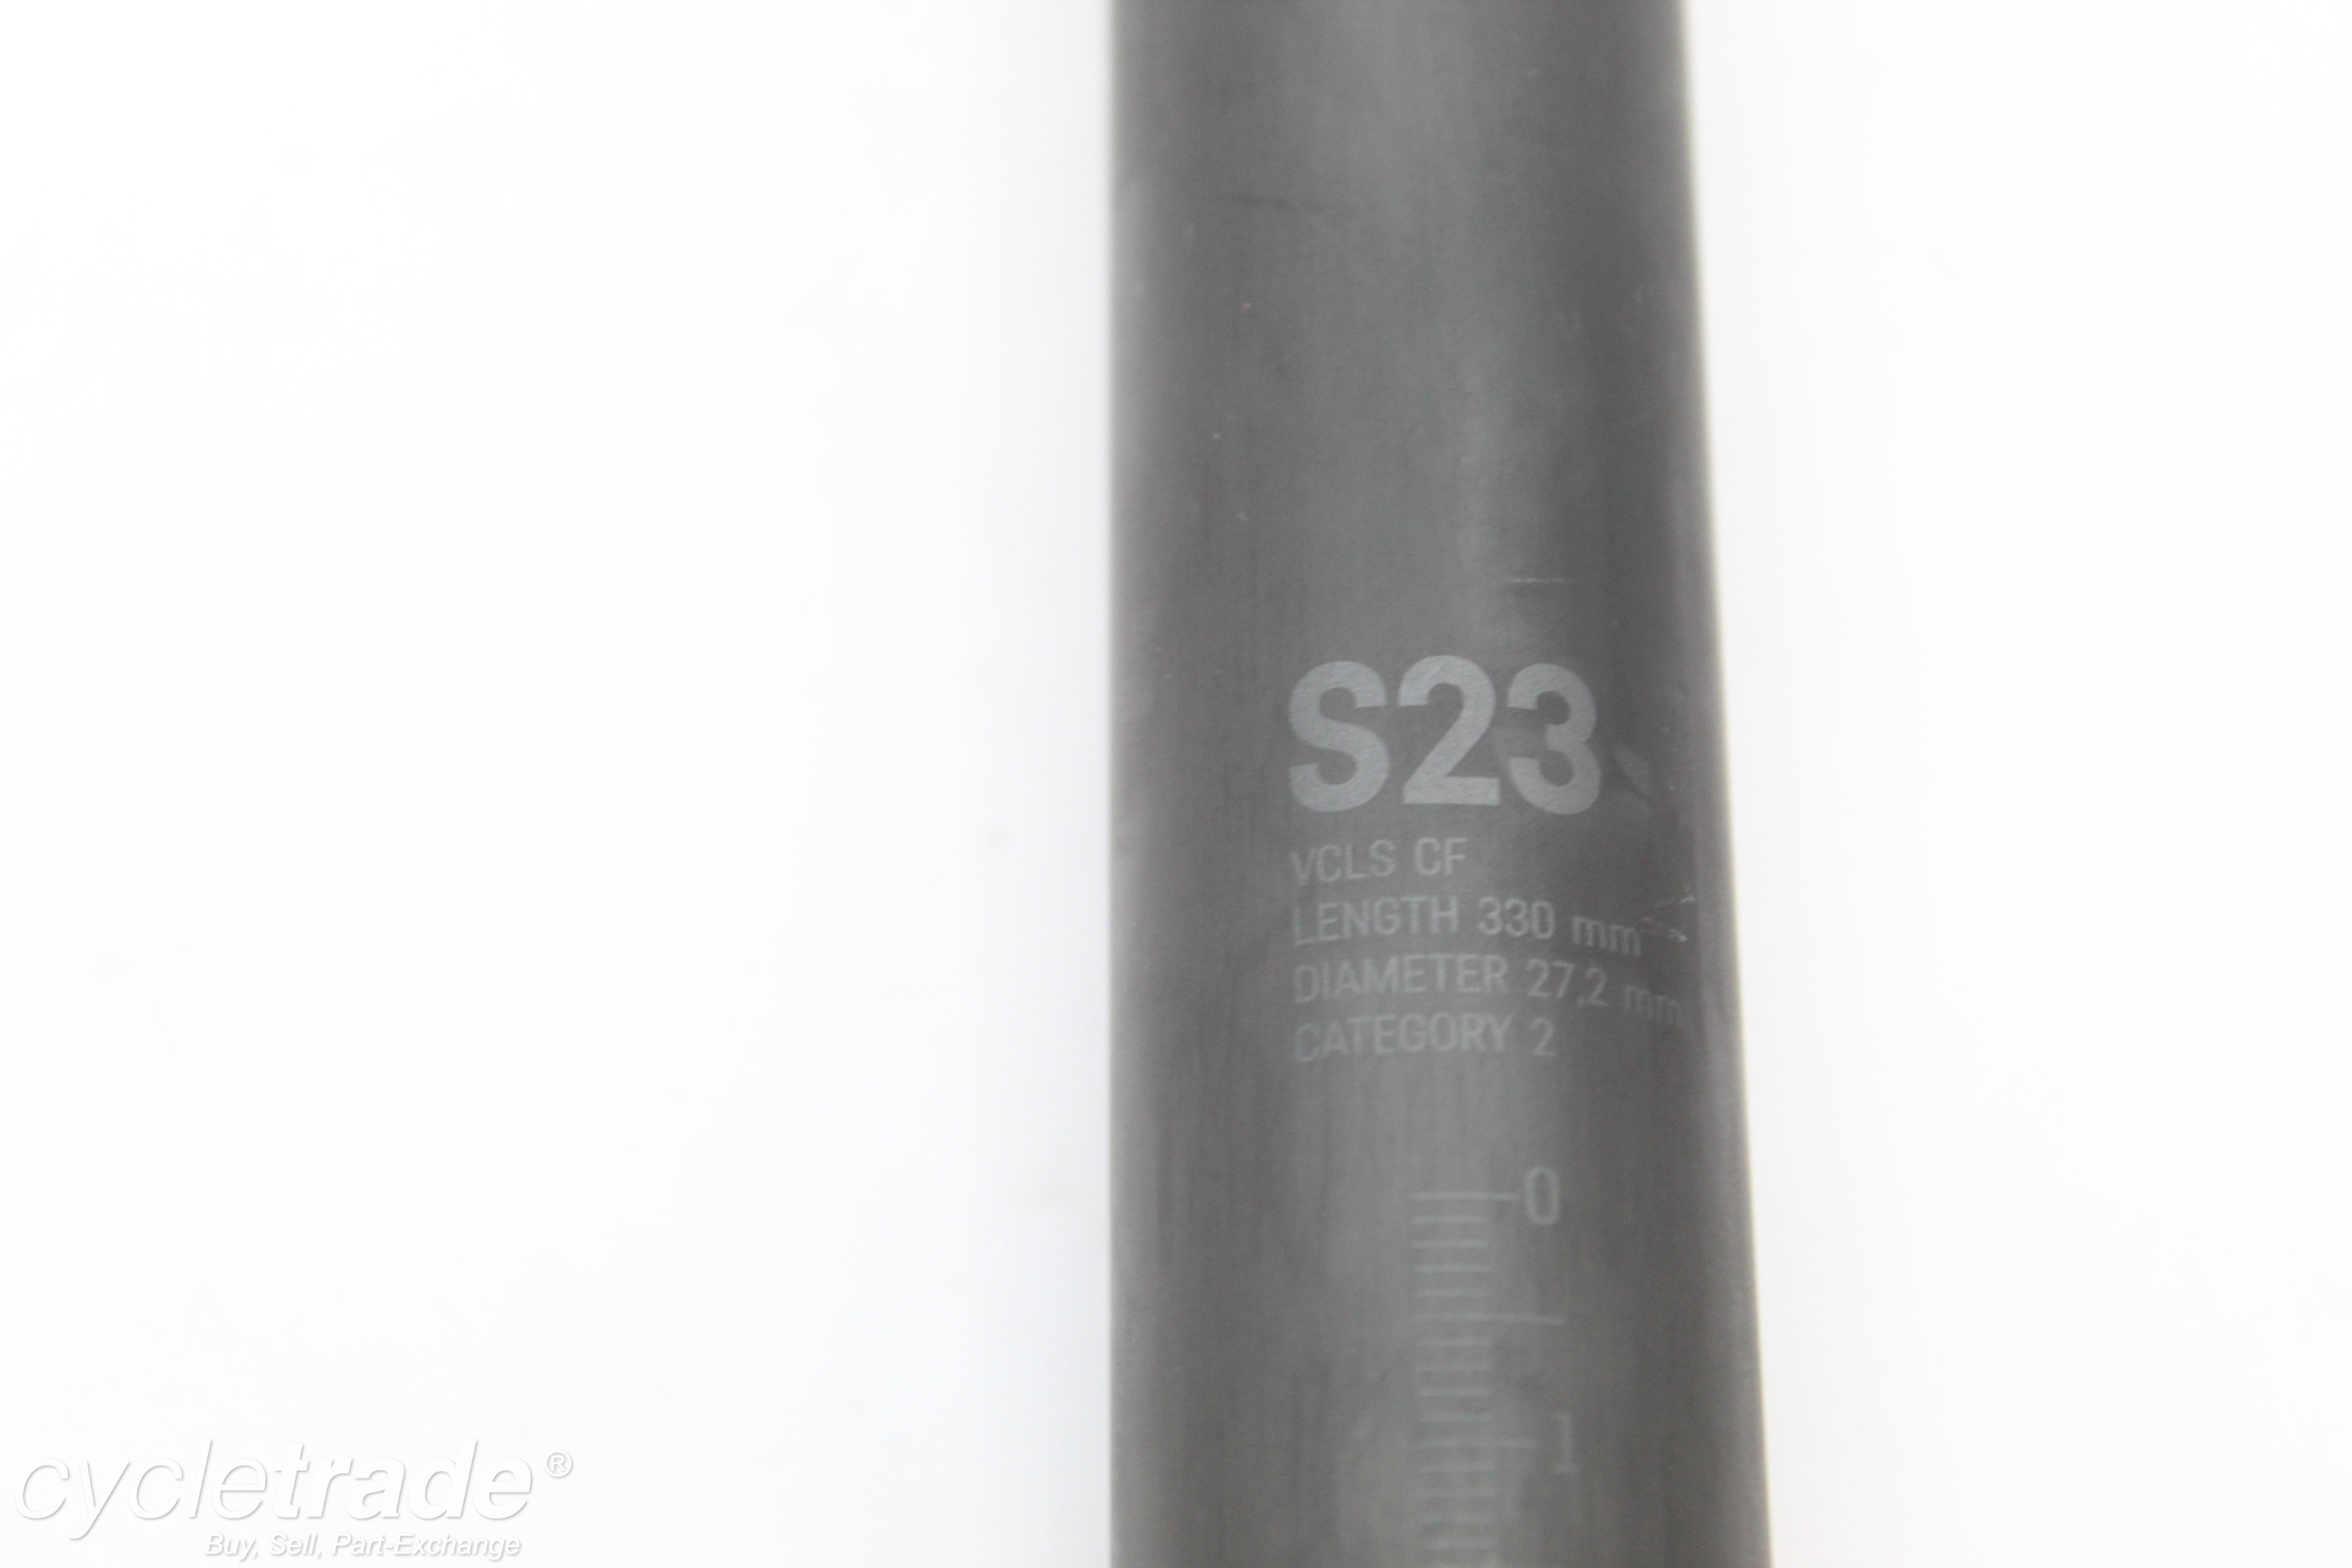 Carbon Seatpost- Canyon S23 VCLS CF 330mm 27.2mm - Lightly Used